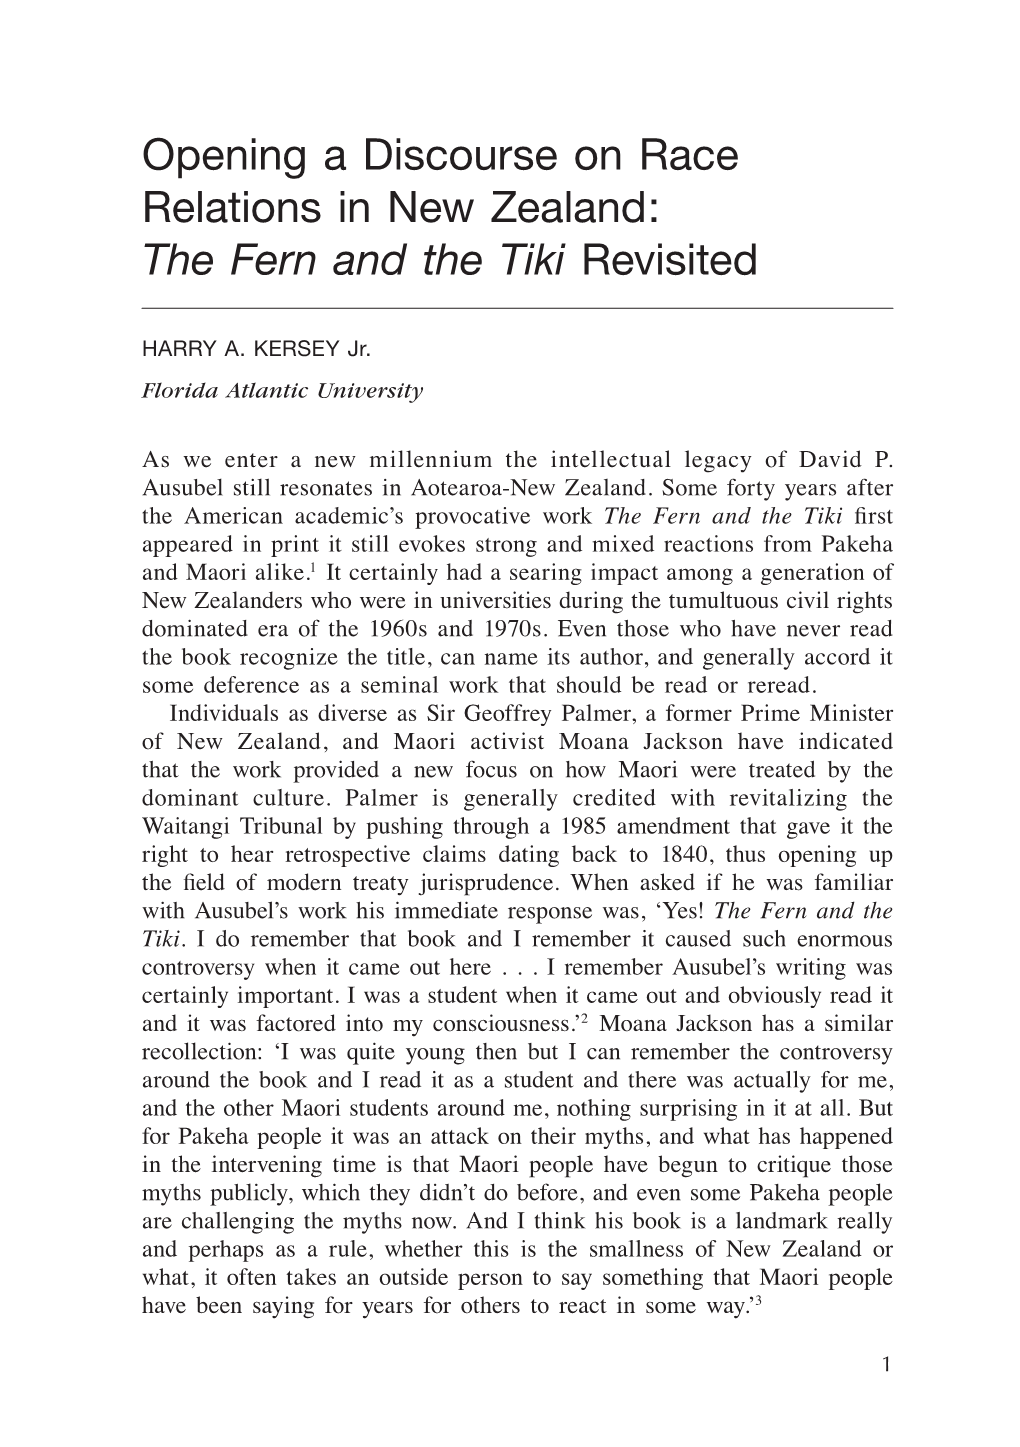 Opening a Discourse on Race Relations in New Zealand: the Fern and the Tiki Revisited